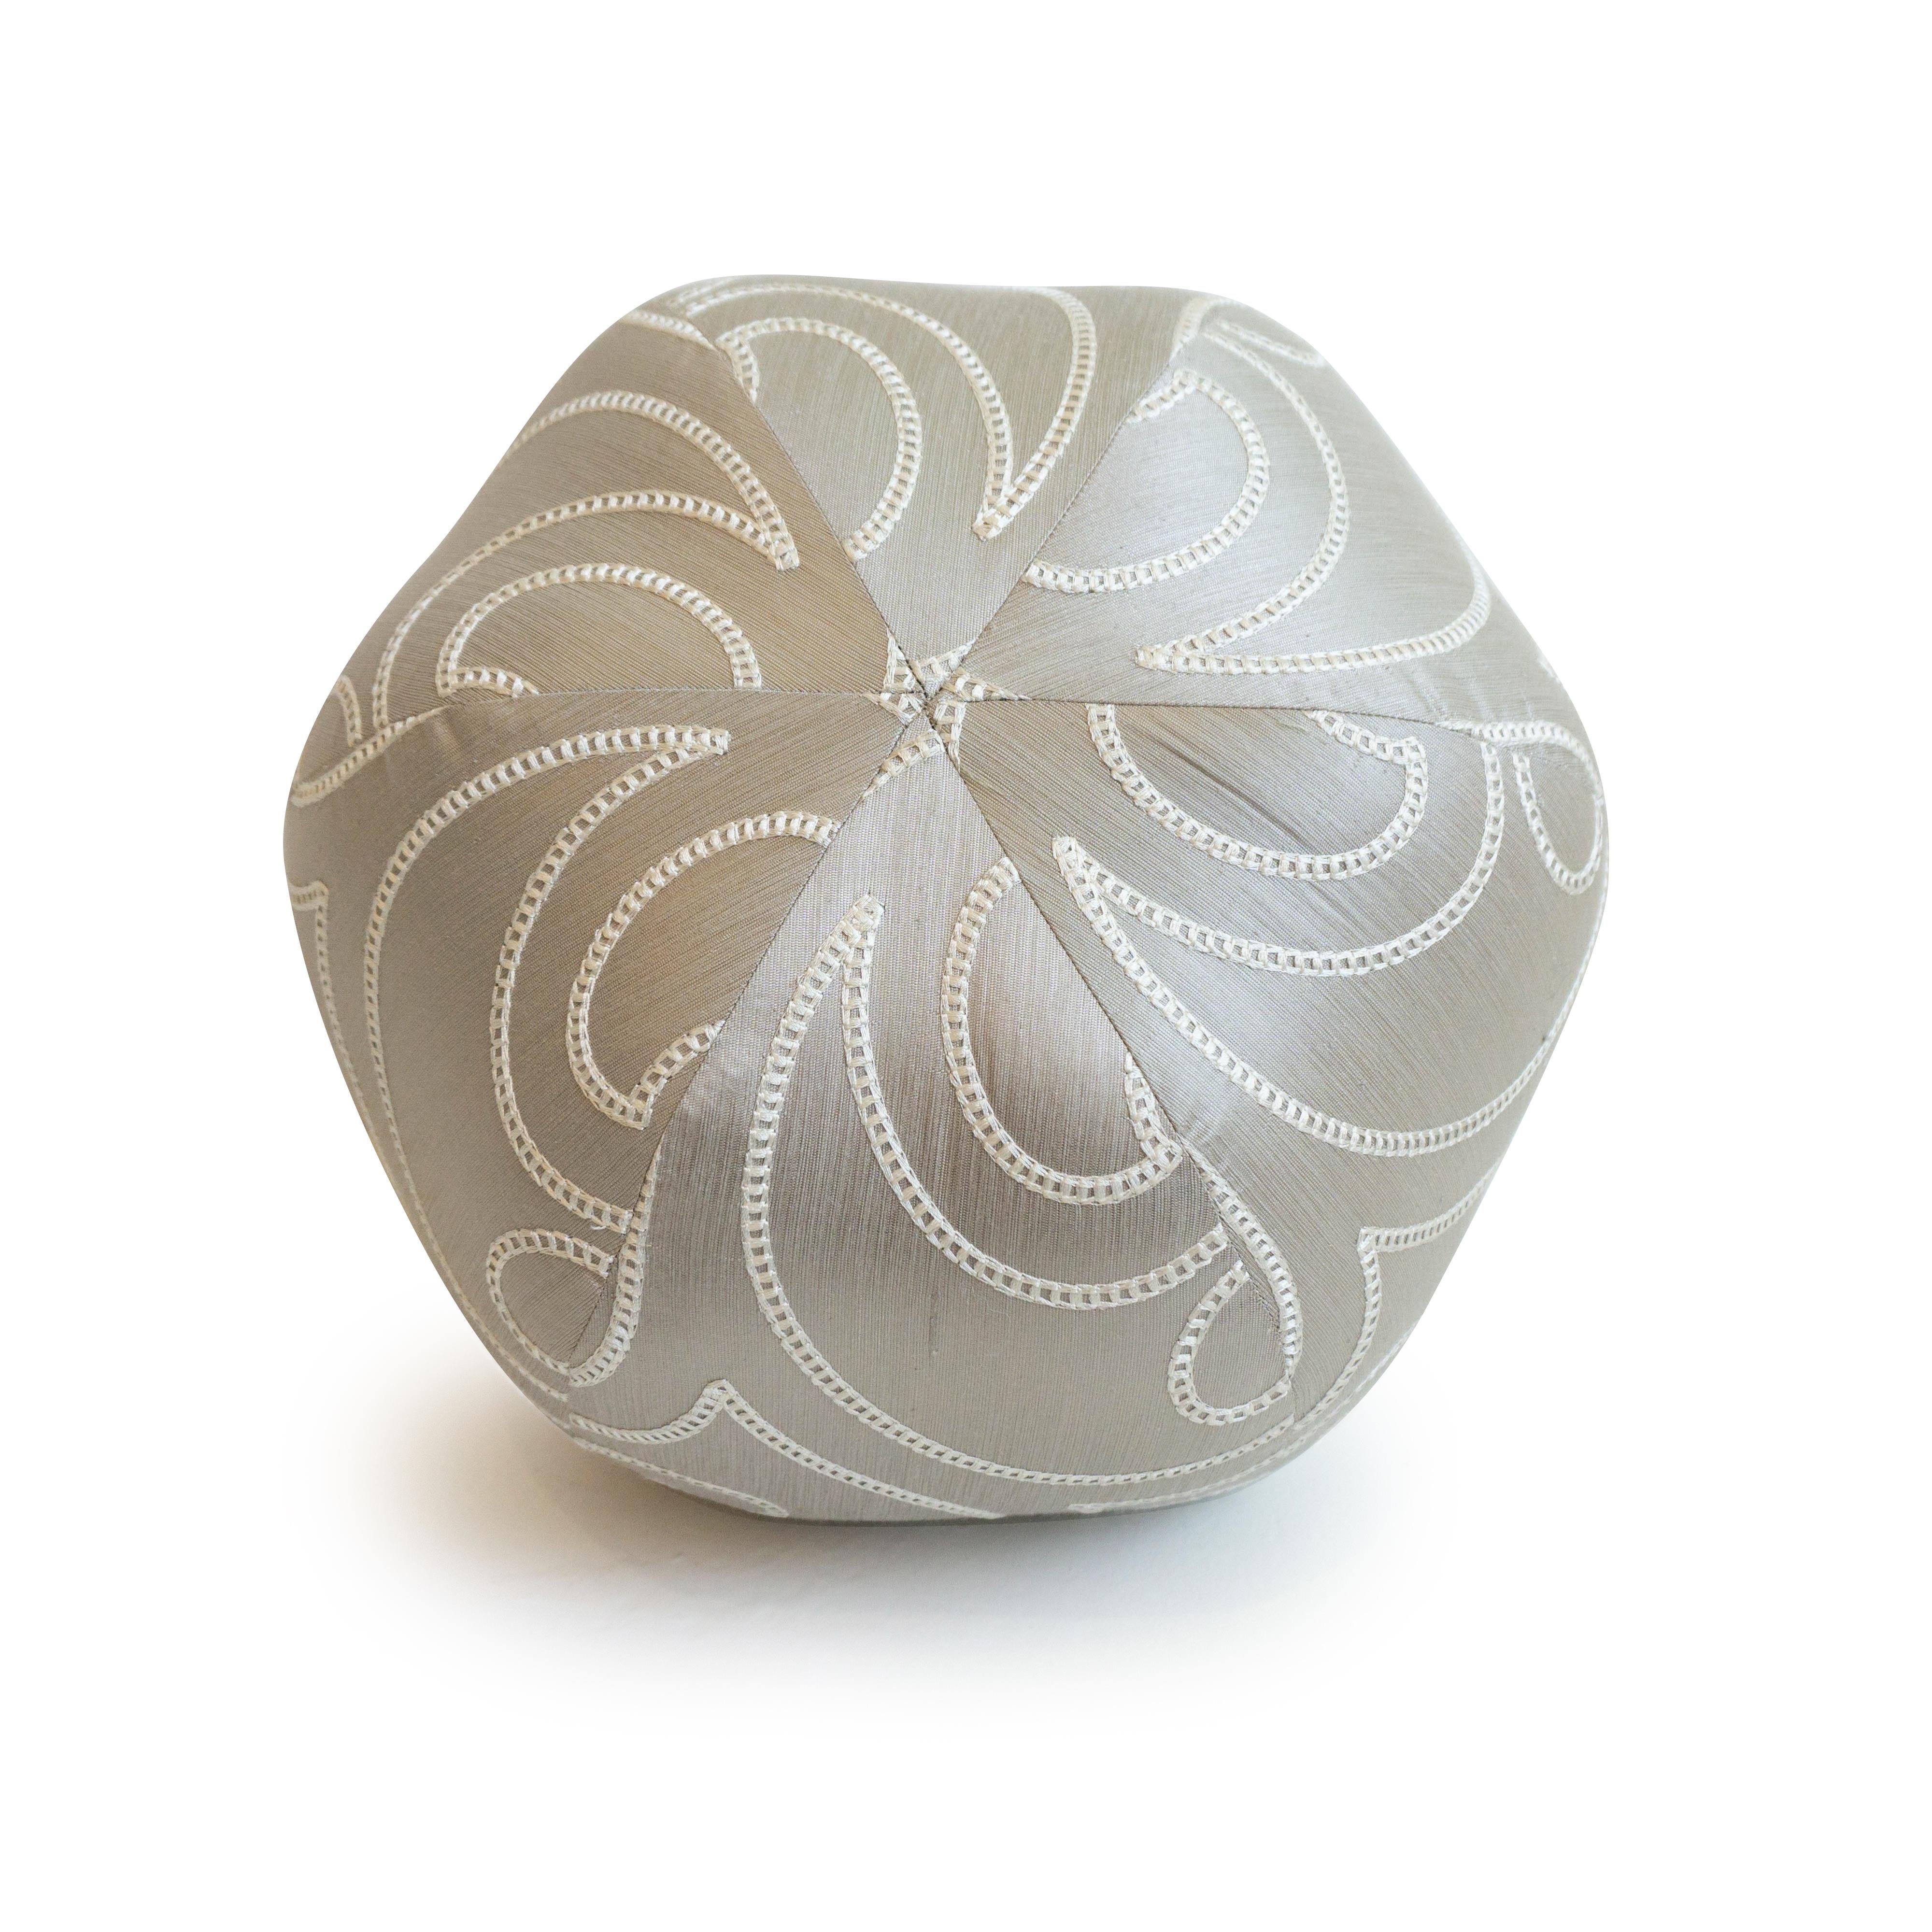 A handmade silk pewter colored ball pillow with a white embroidered pattern. Hand sewn in our studio in Norwalk, Connecticut. 

Measurements: 9